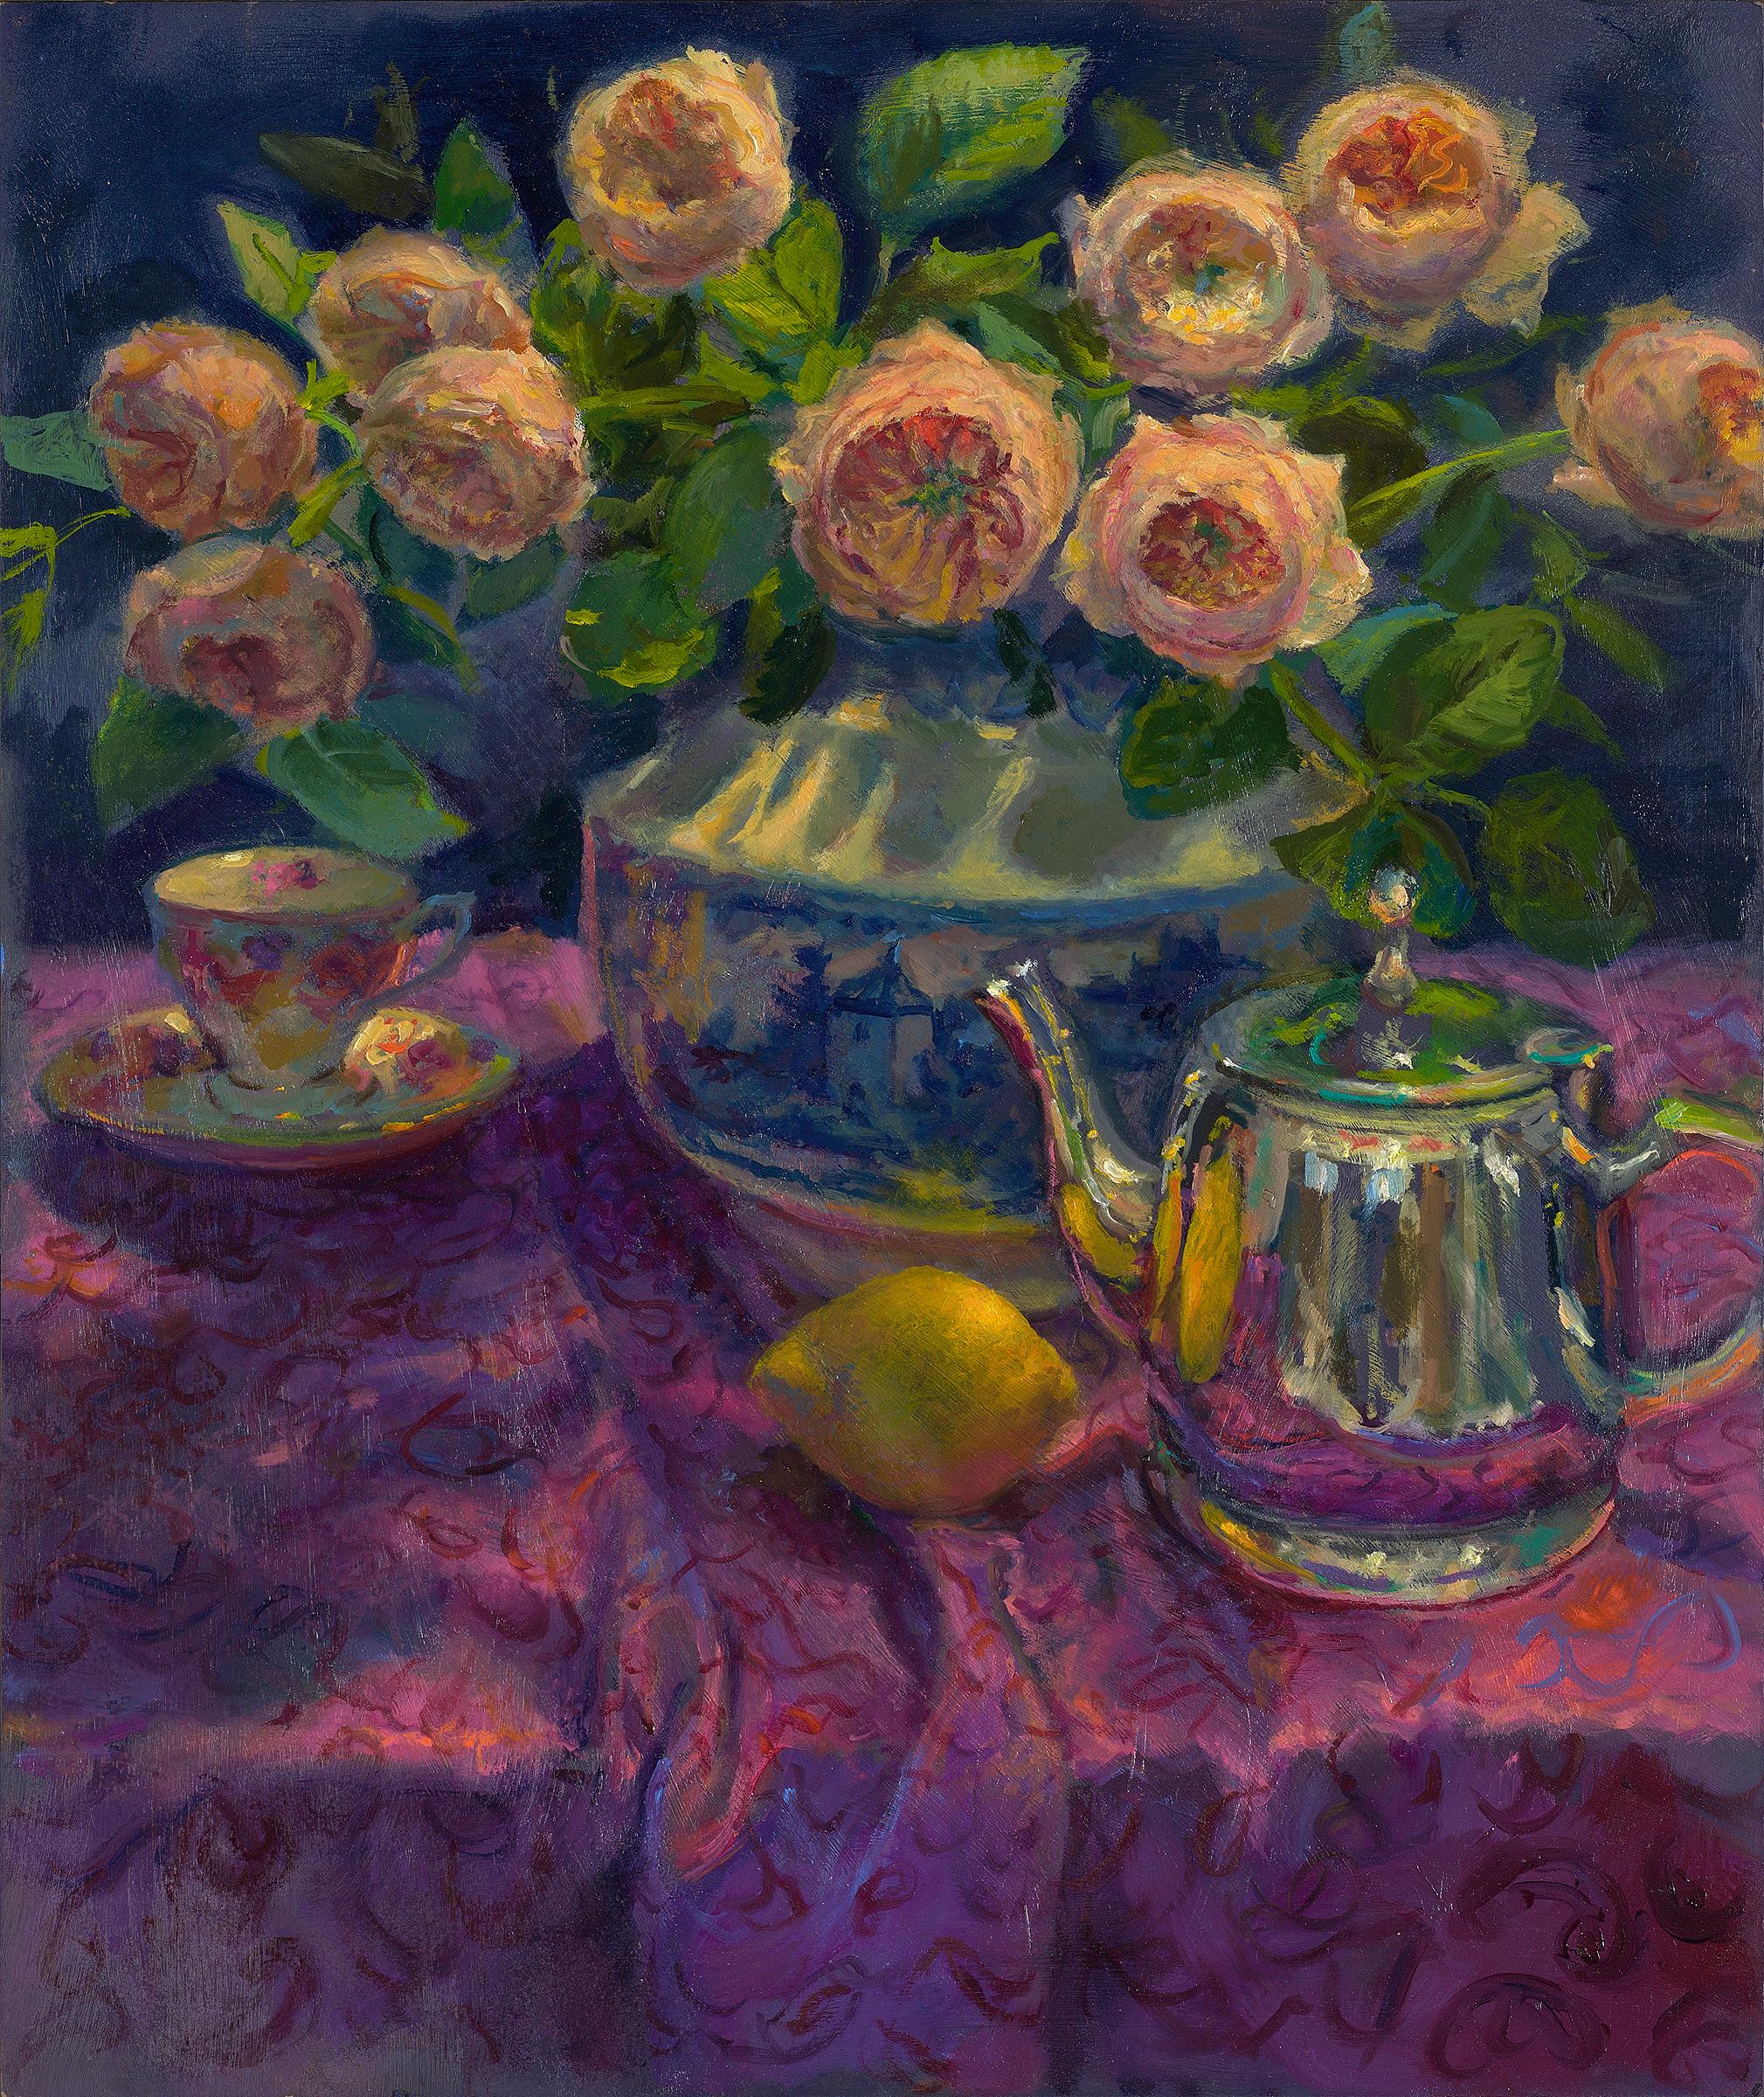 Keimpe van der Kooi Interior Painting - Home- 21st Century Contemporary Dutch Flower Still-life Painting with Roses